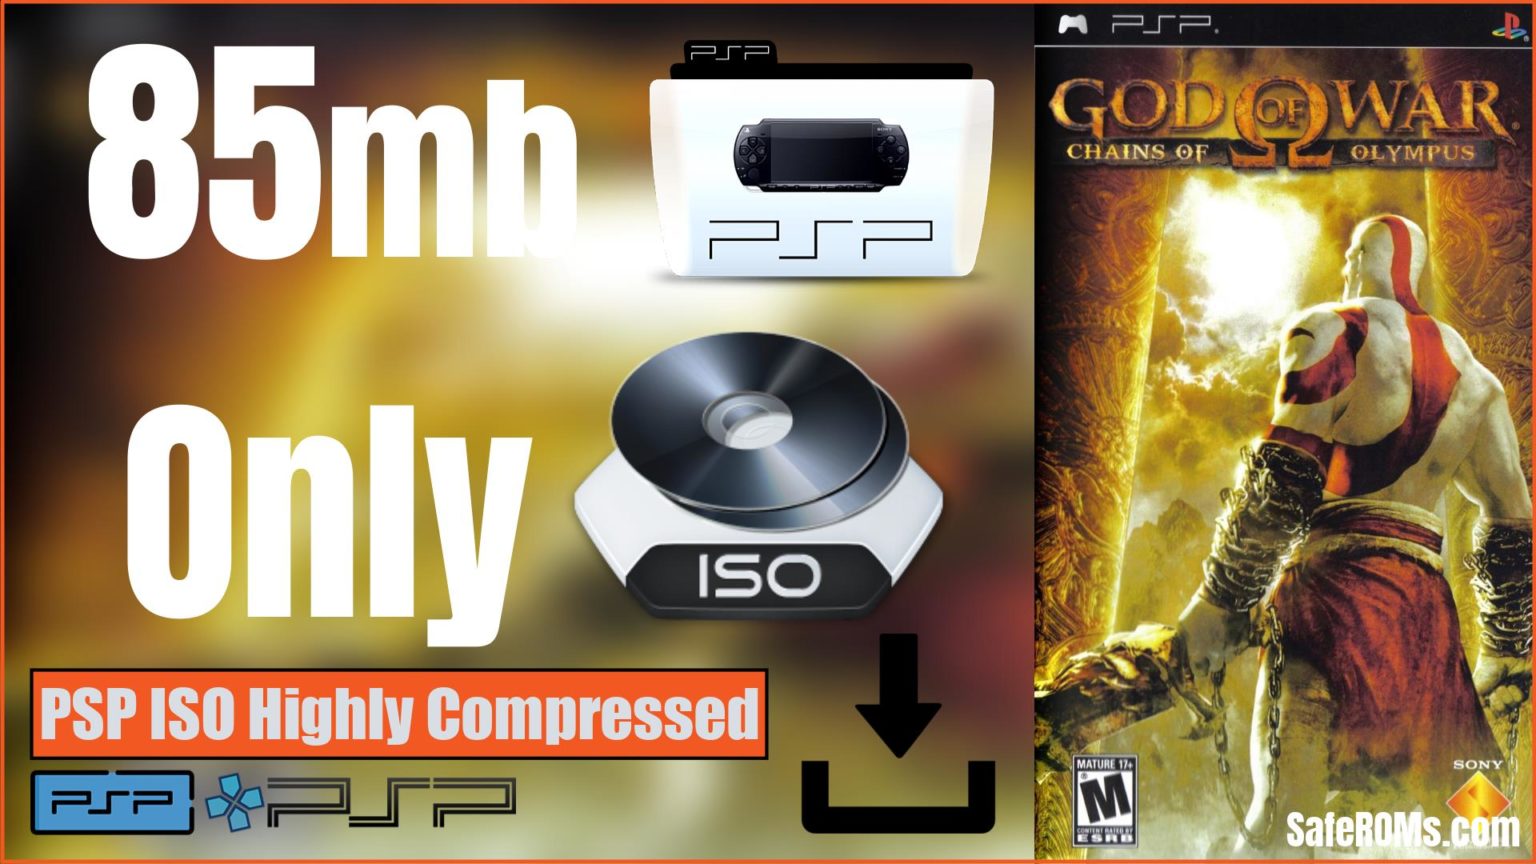 god of war chain of olympus iso highly compressed for ps3